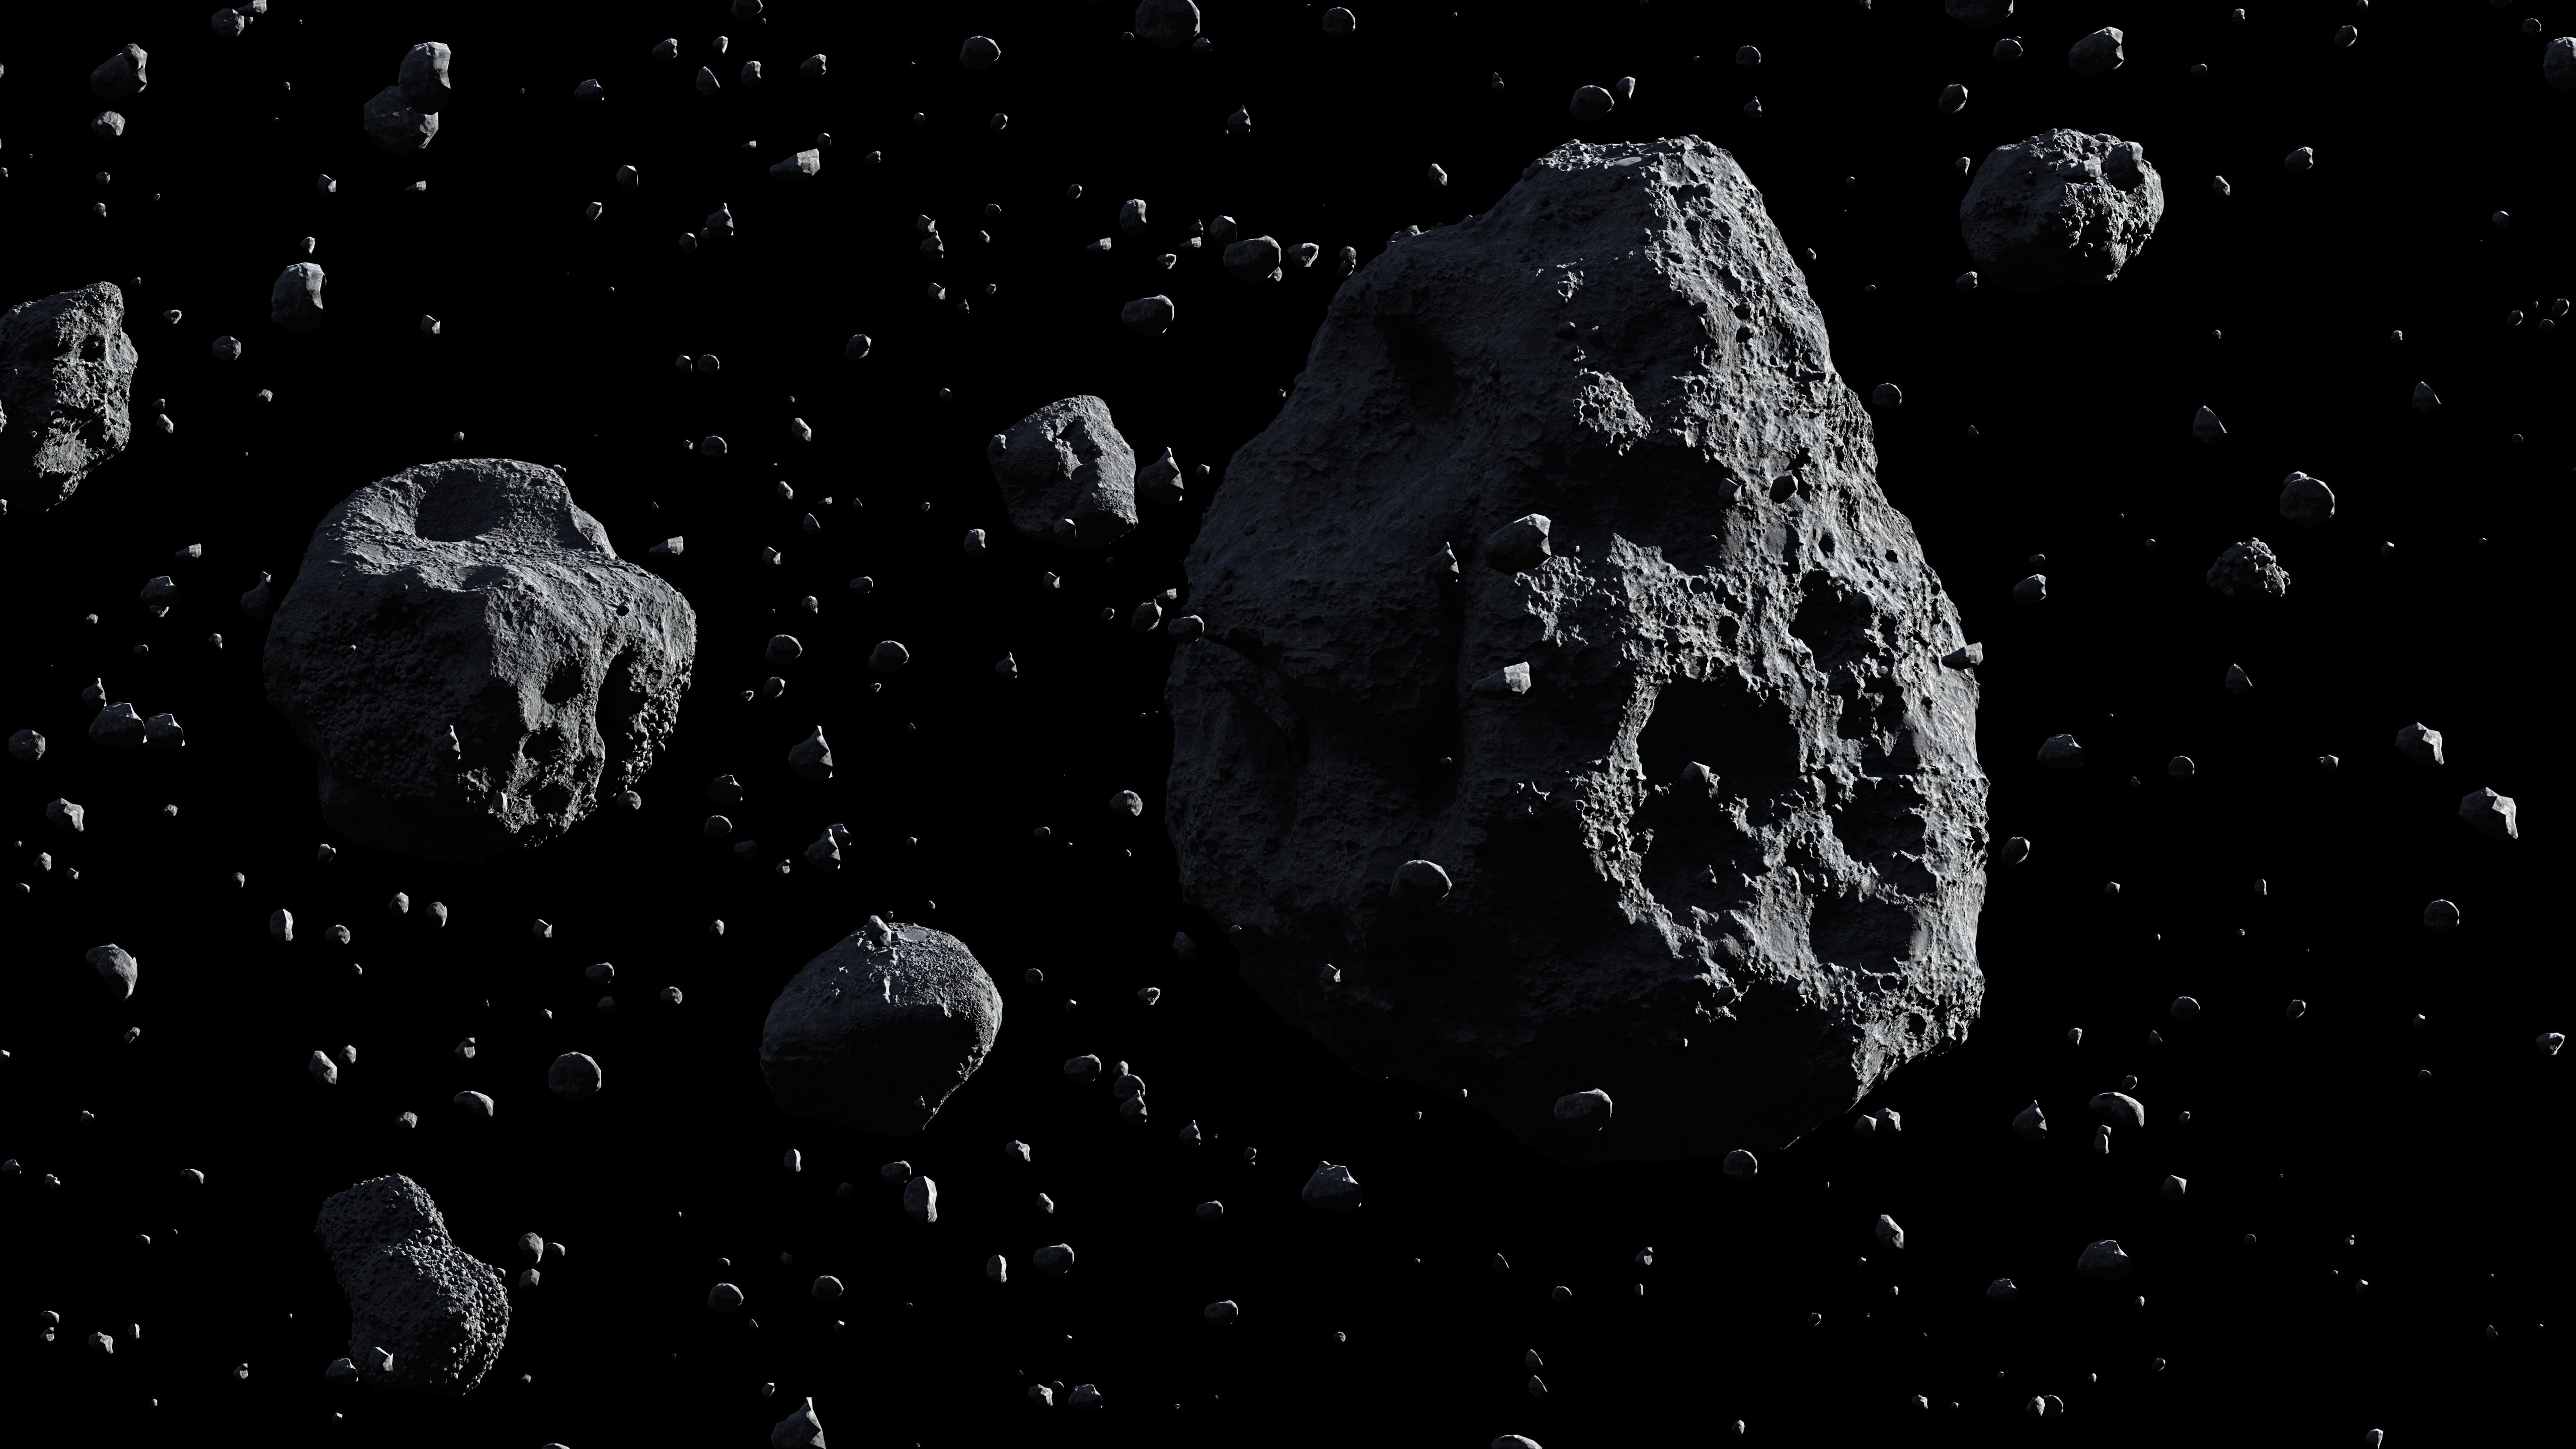 An artist’s conception of asteroids.